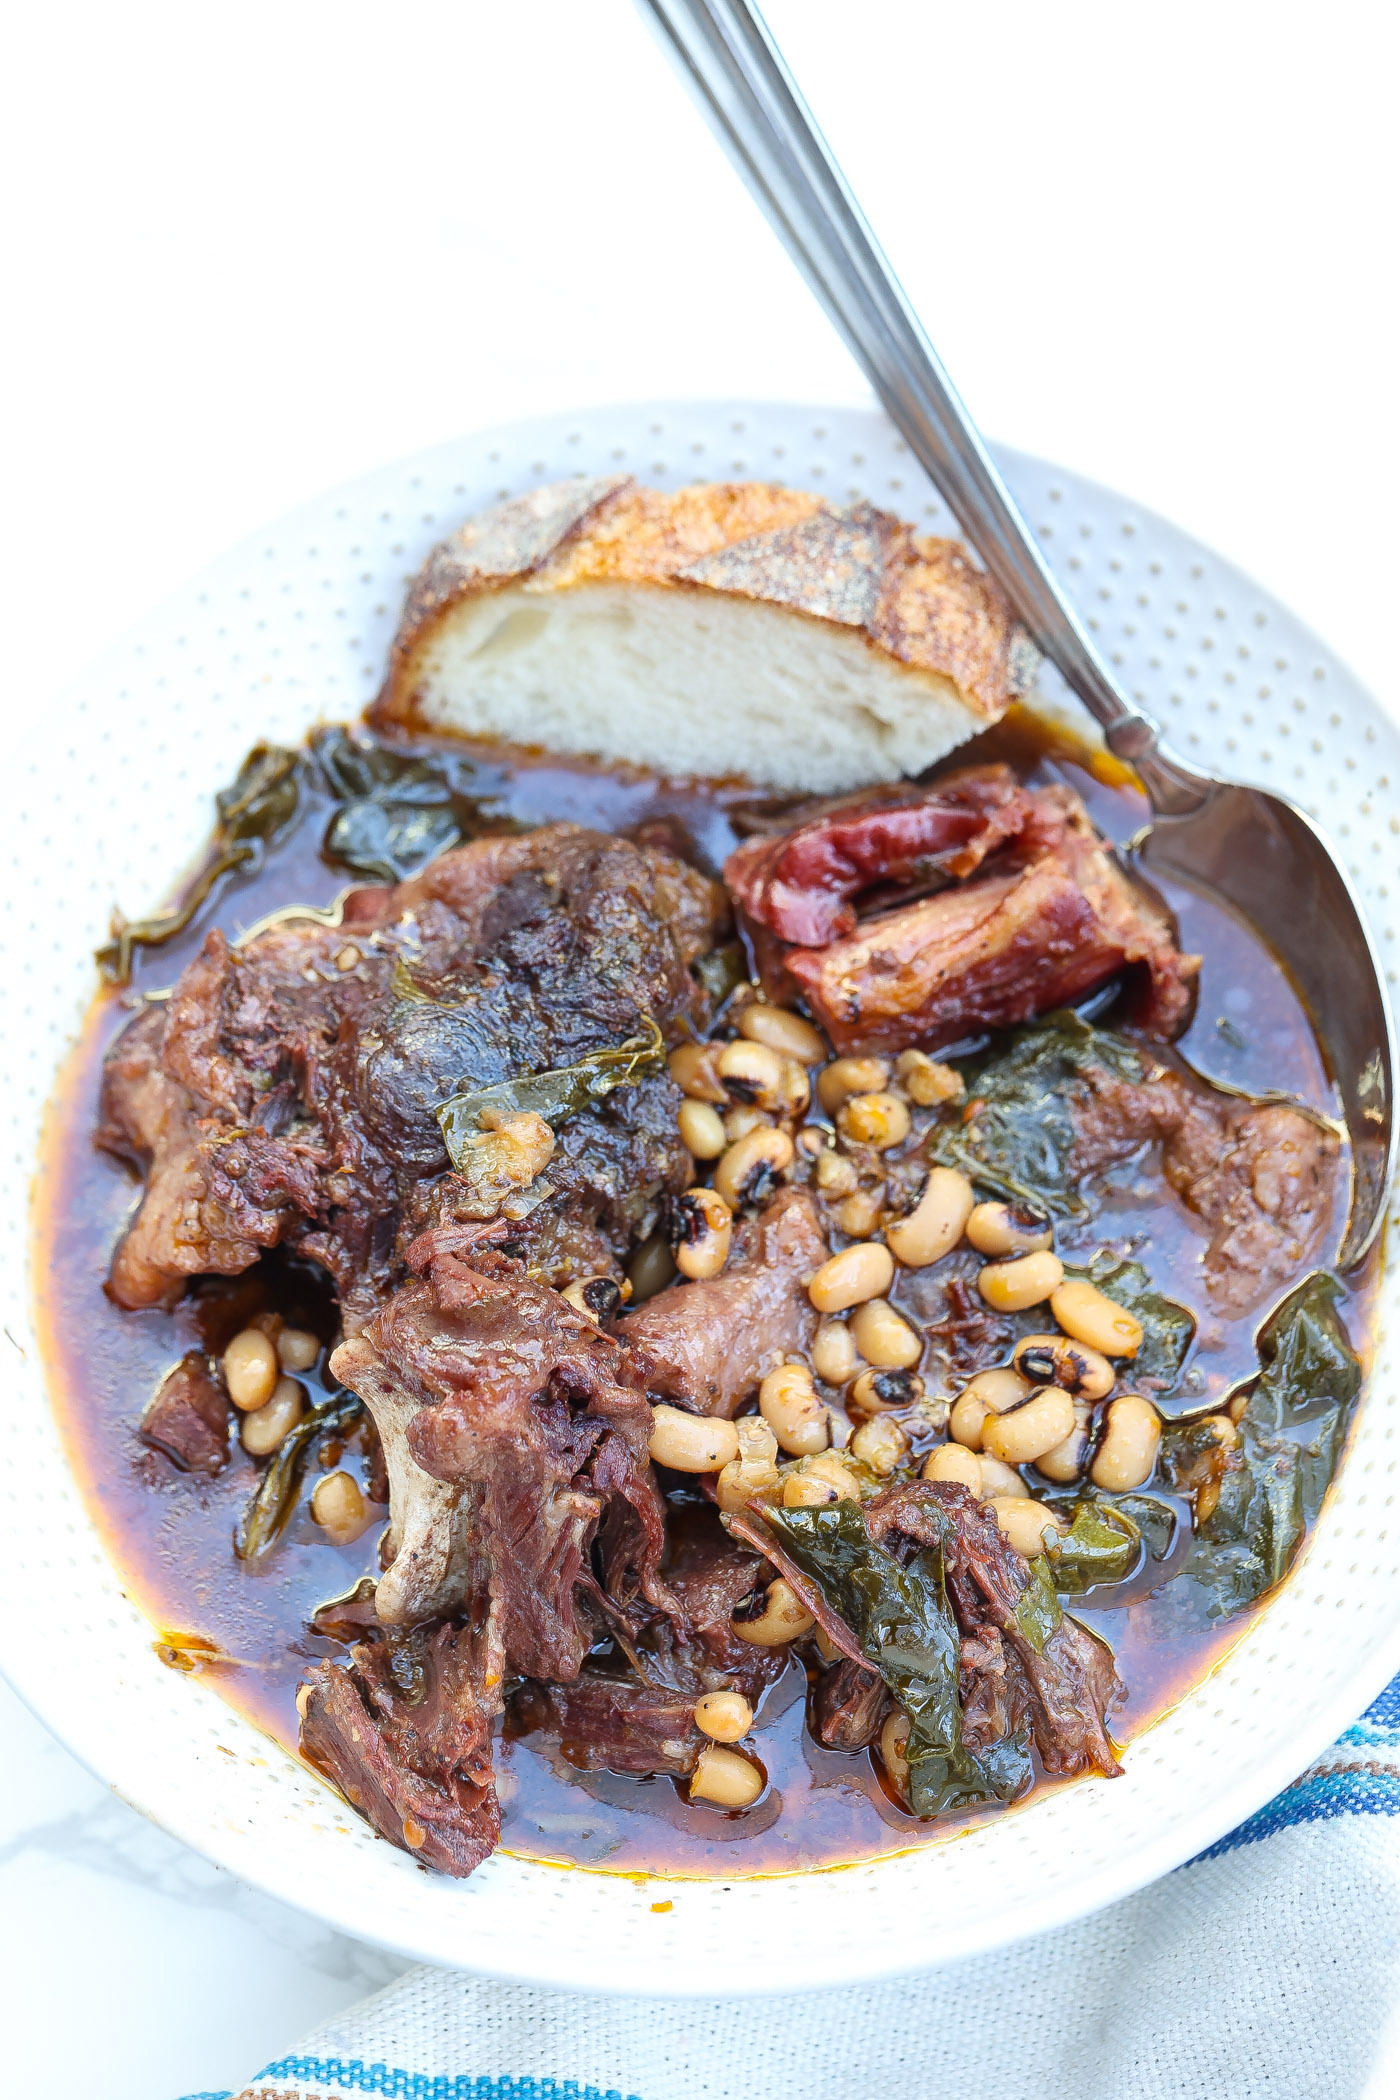 beef oxtail soup with collard greens and blackeyed peas in a white bowl